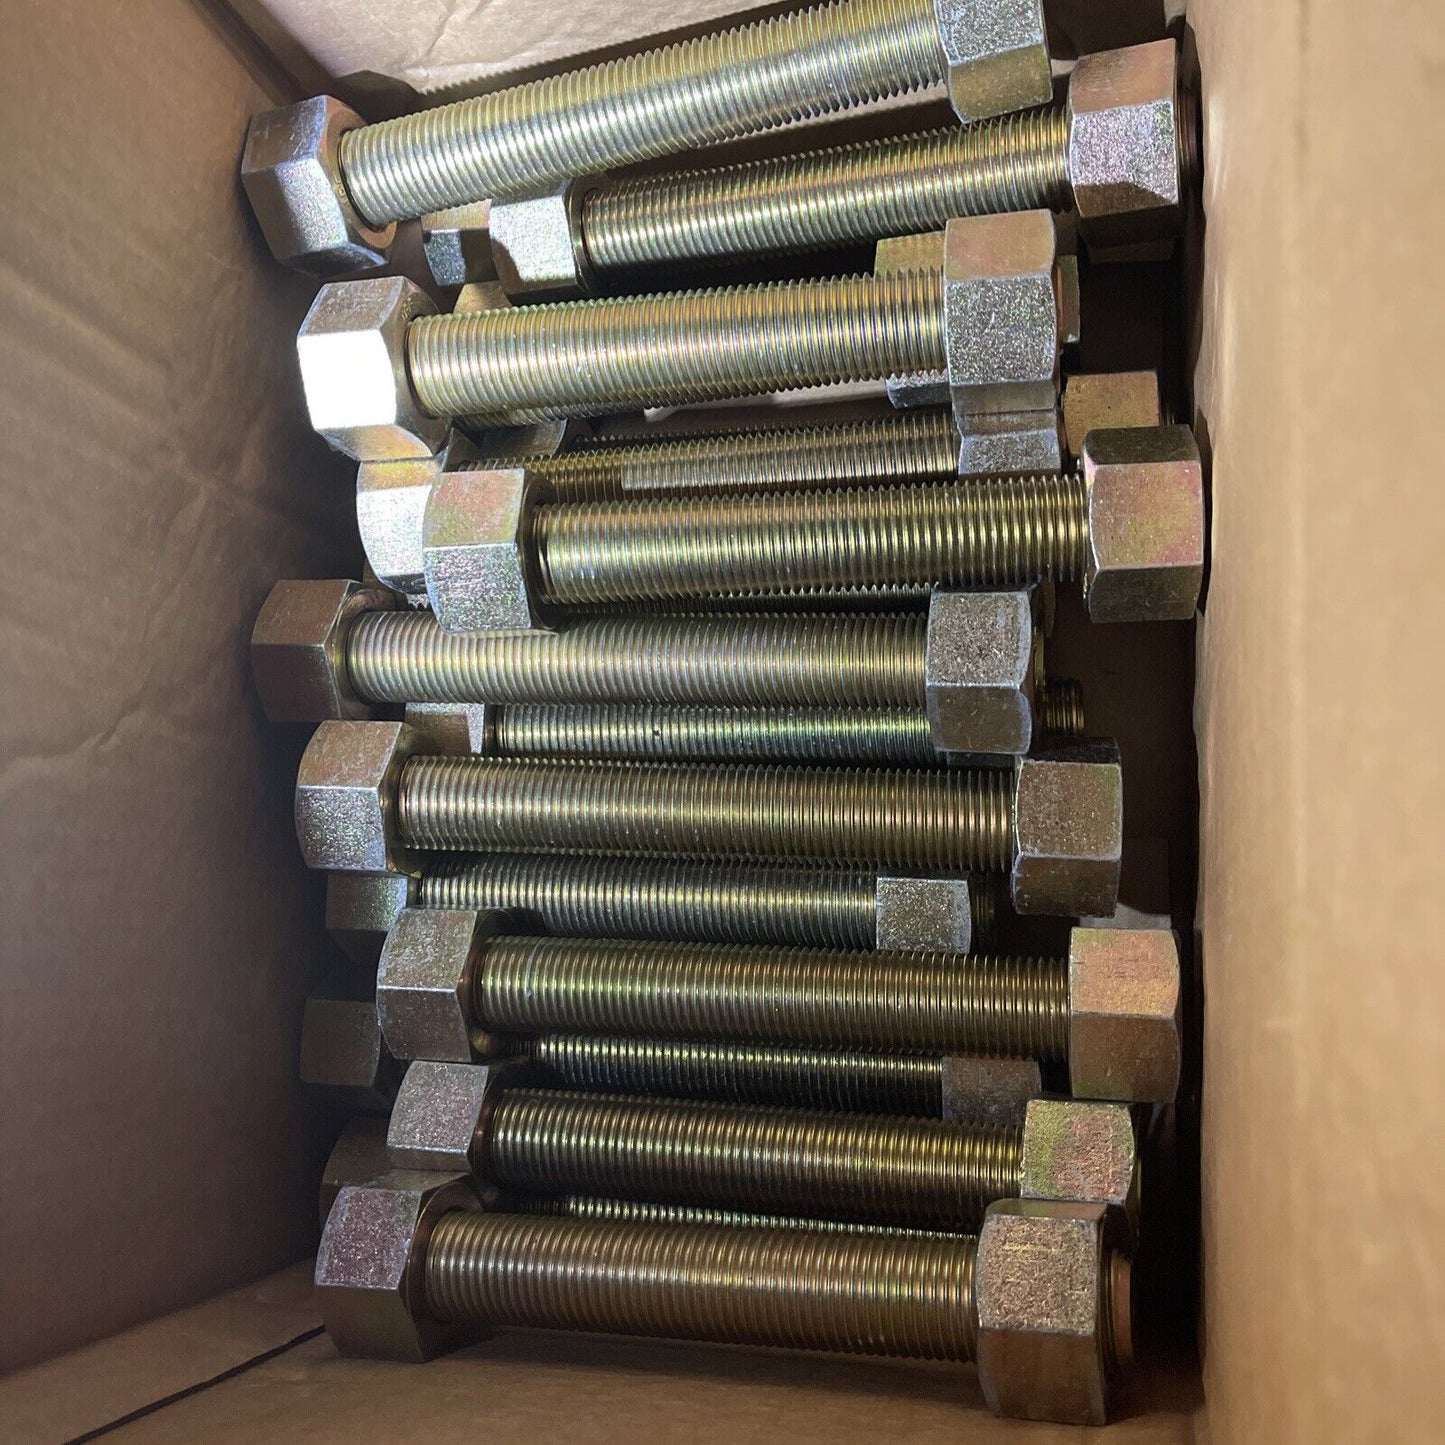 1-1/4"-8 x 9" (OAL 9-1/4") A193 GRADE B7 ZINC FULLY THREADED STUD WITH TWO NUTS